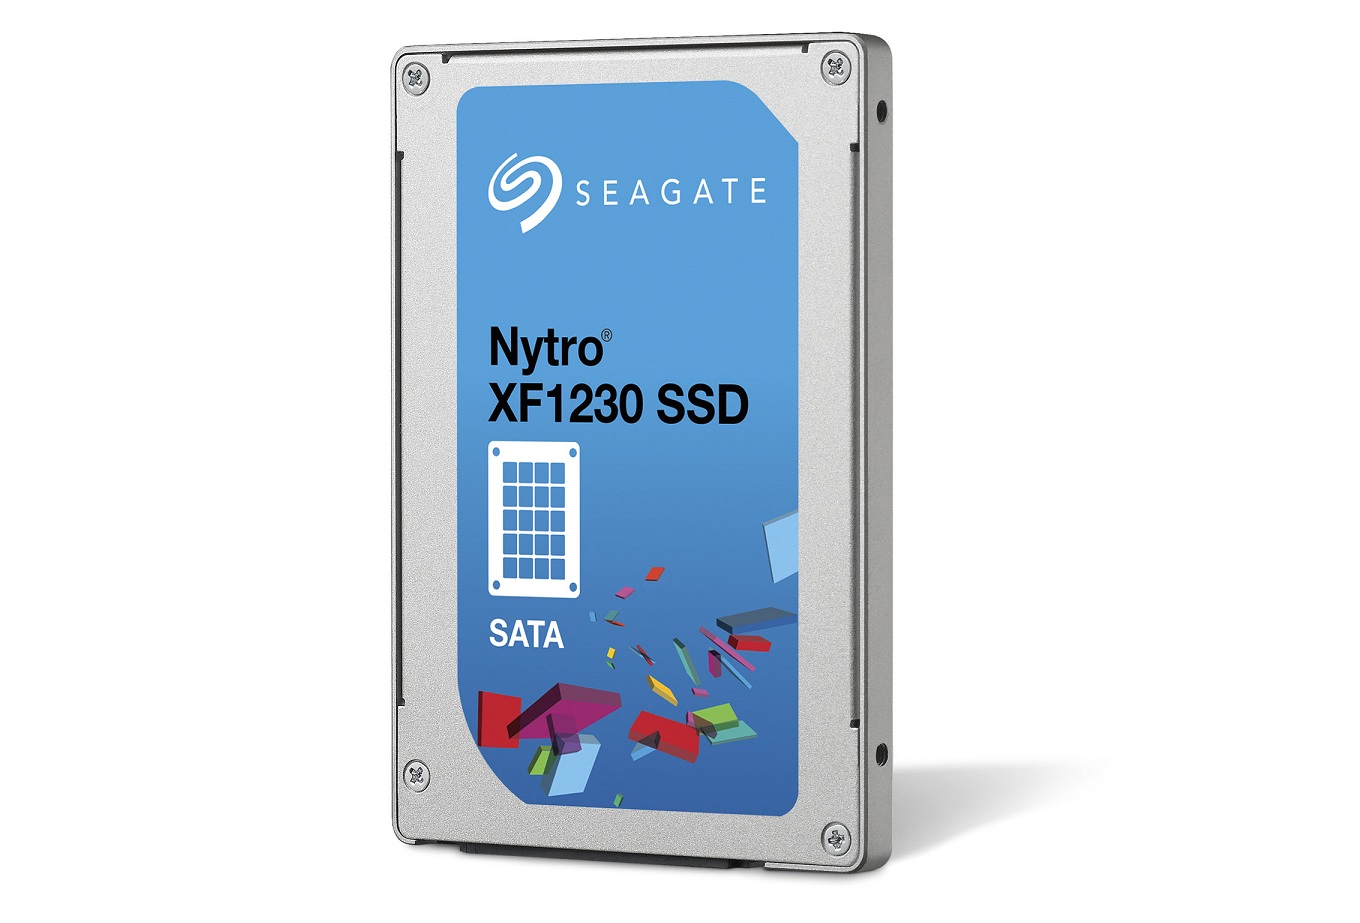 Seagate Introduces Nytro XF1230 SATA SSD for Read Intensive Workloads